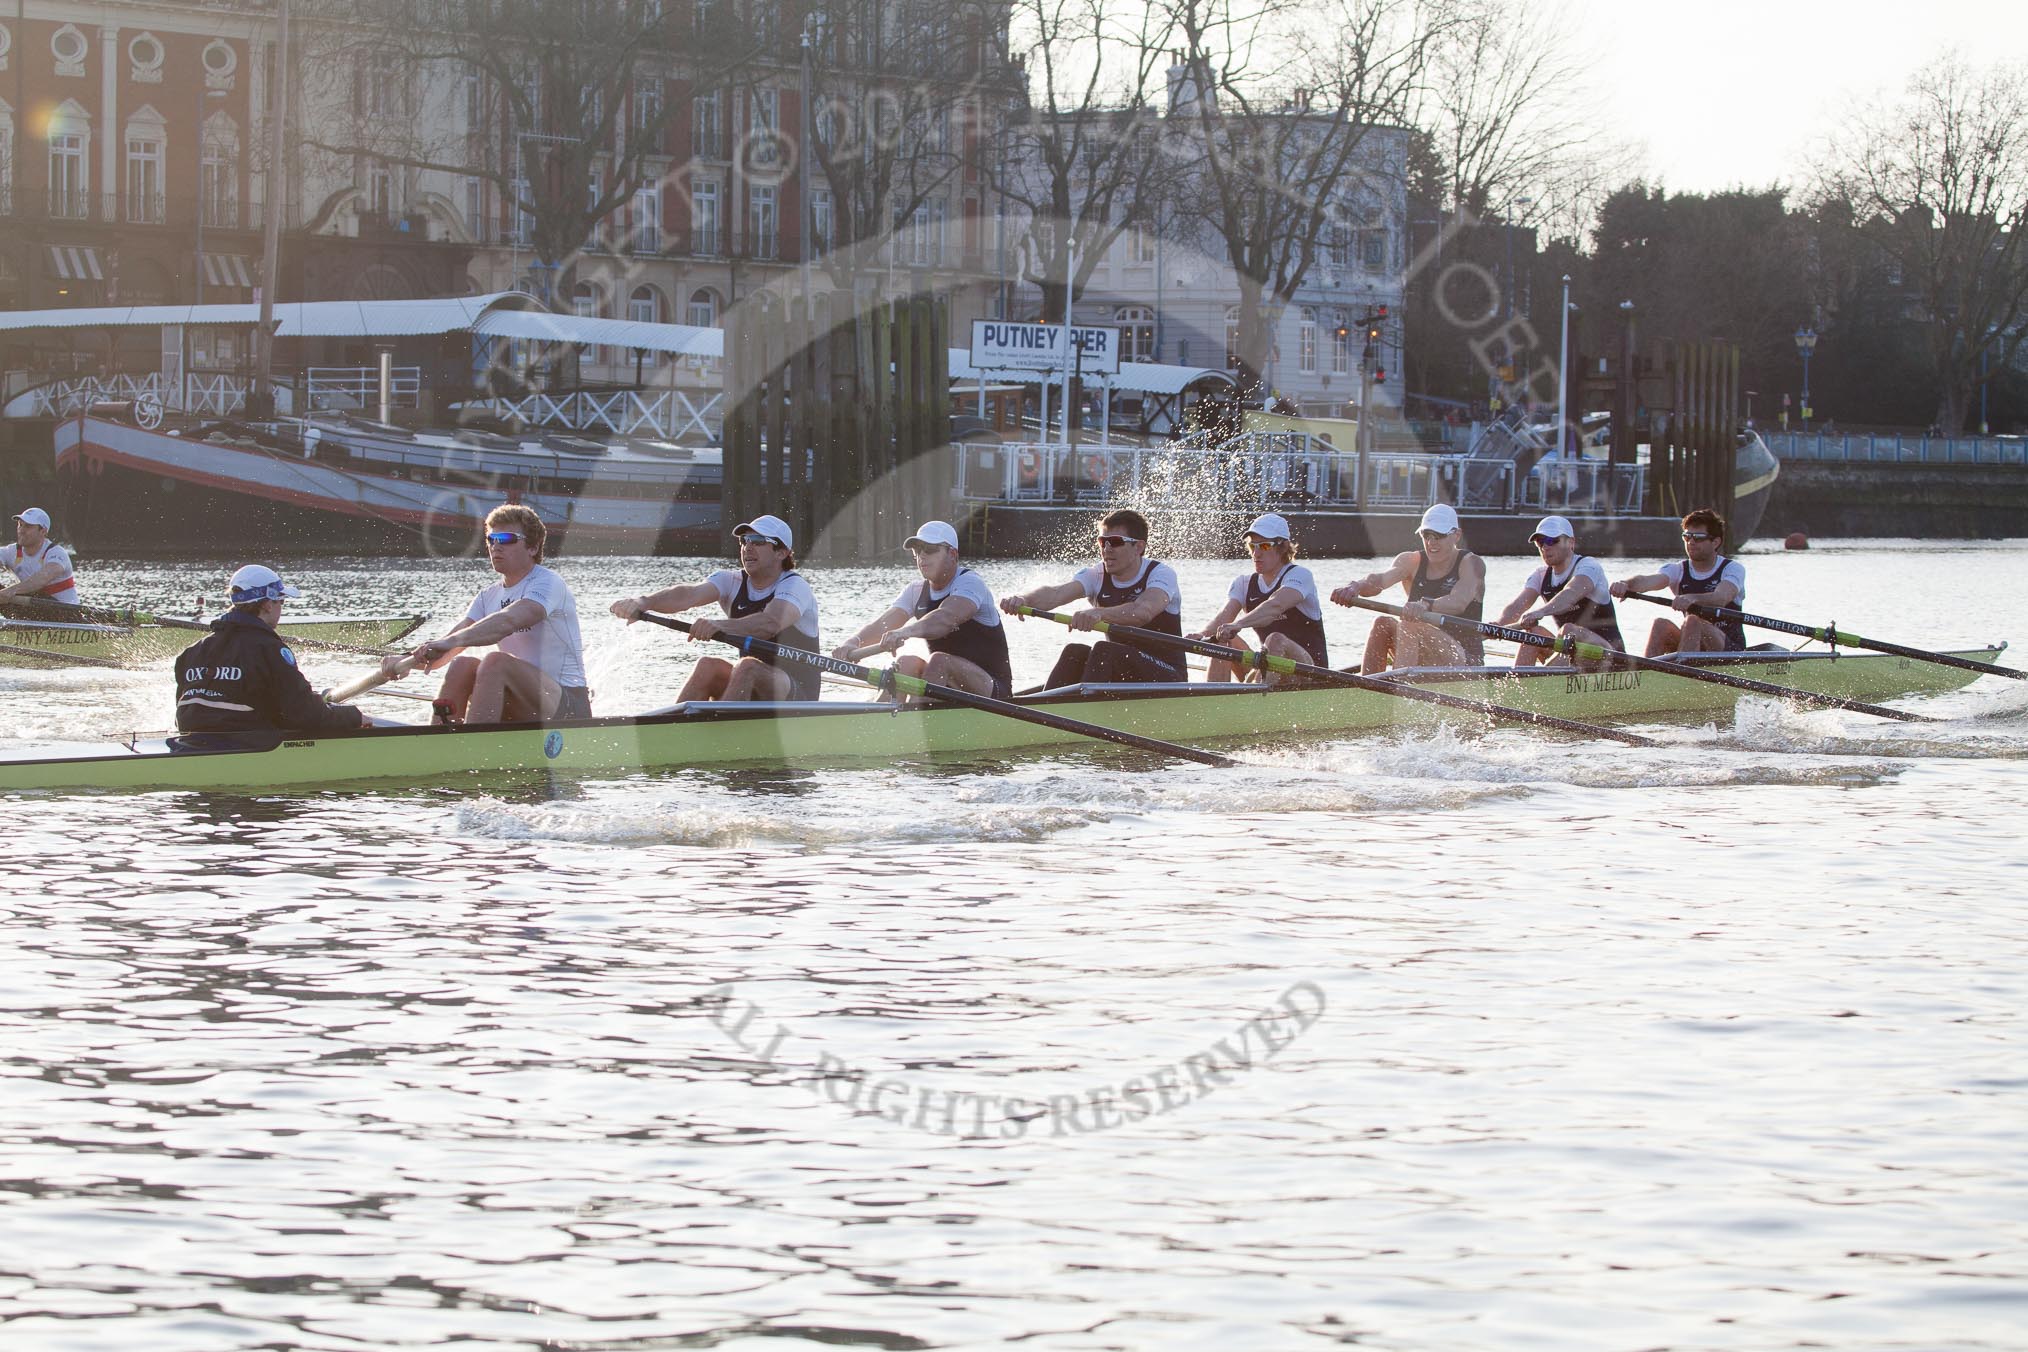 The Boat Race season 2014 - fixture OUBC vs German U23: The race is on - the German U23-boat, on the left, and the OUBC boat approaching Putney Pier..
River Thames between Putney Bridge and Chiswick Bridge,



on 08 March 2014 at 16:45, image #33